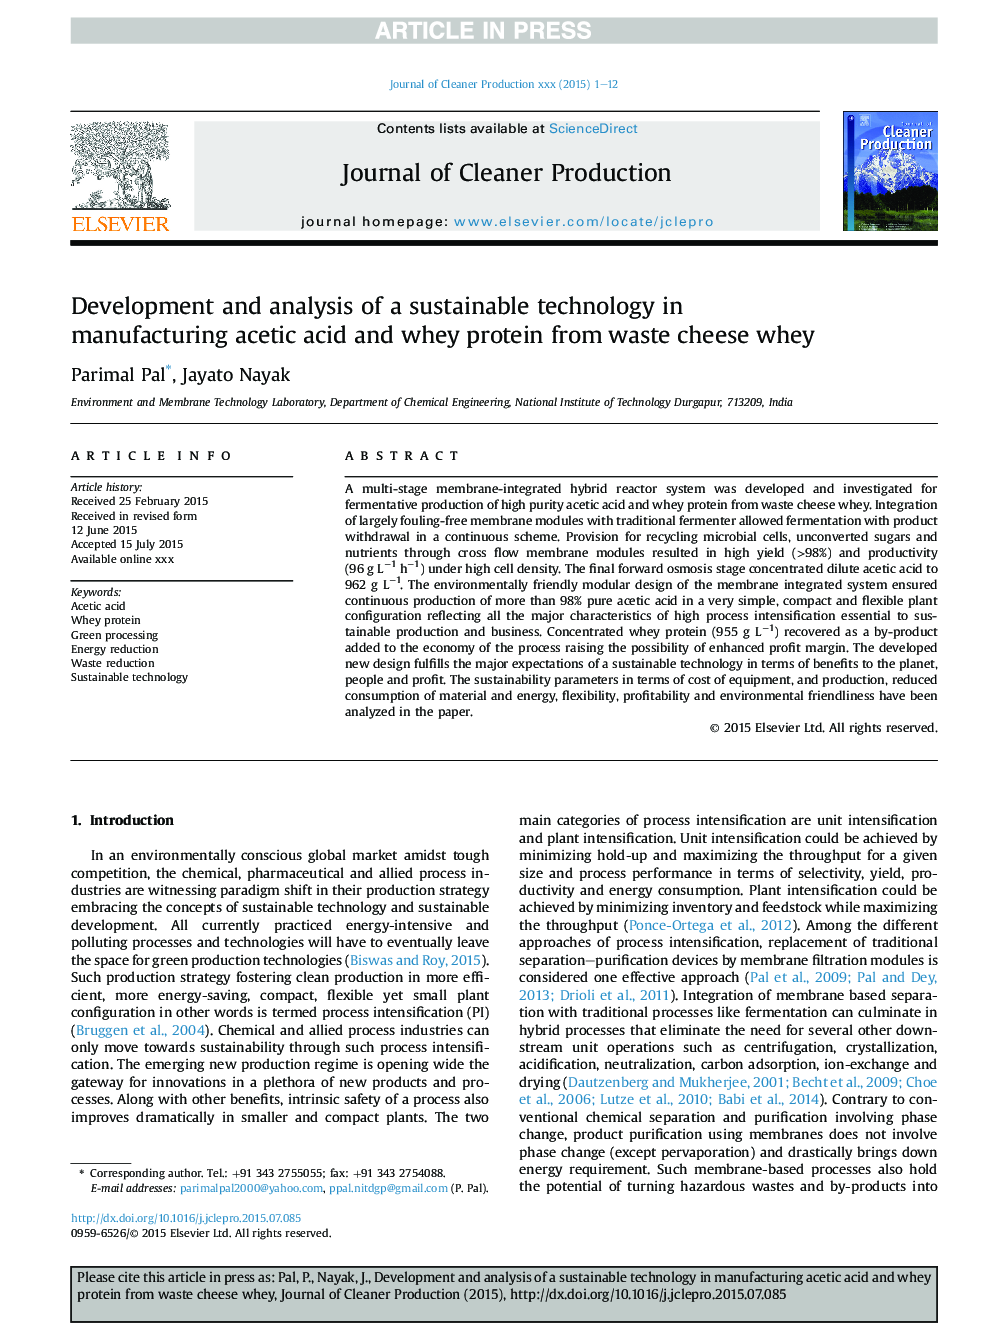 Development and analysis of a sustainable technology in manufacturing acetic acid and whey protein from waste cheese whey